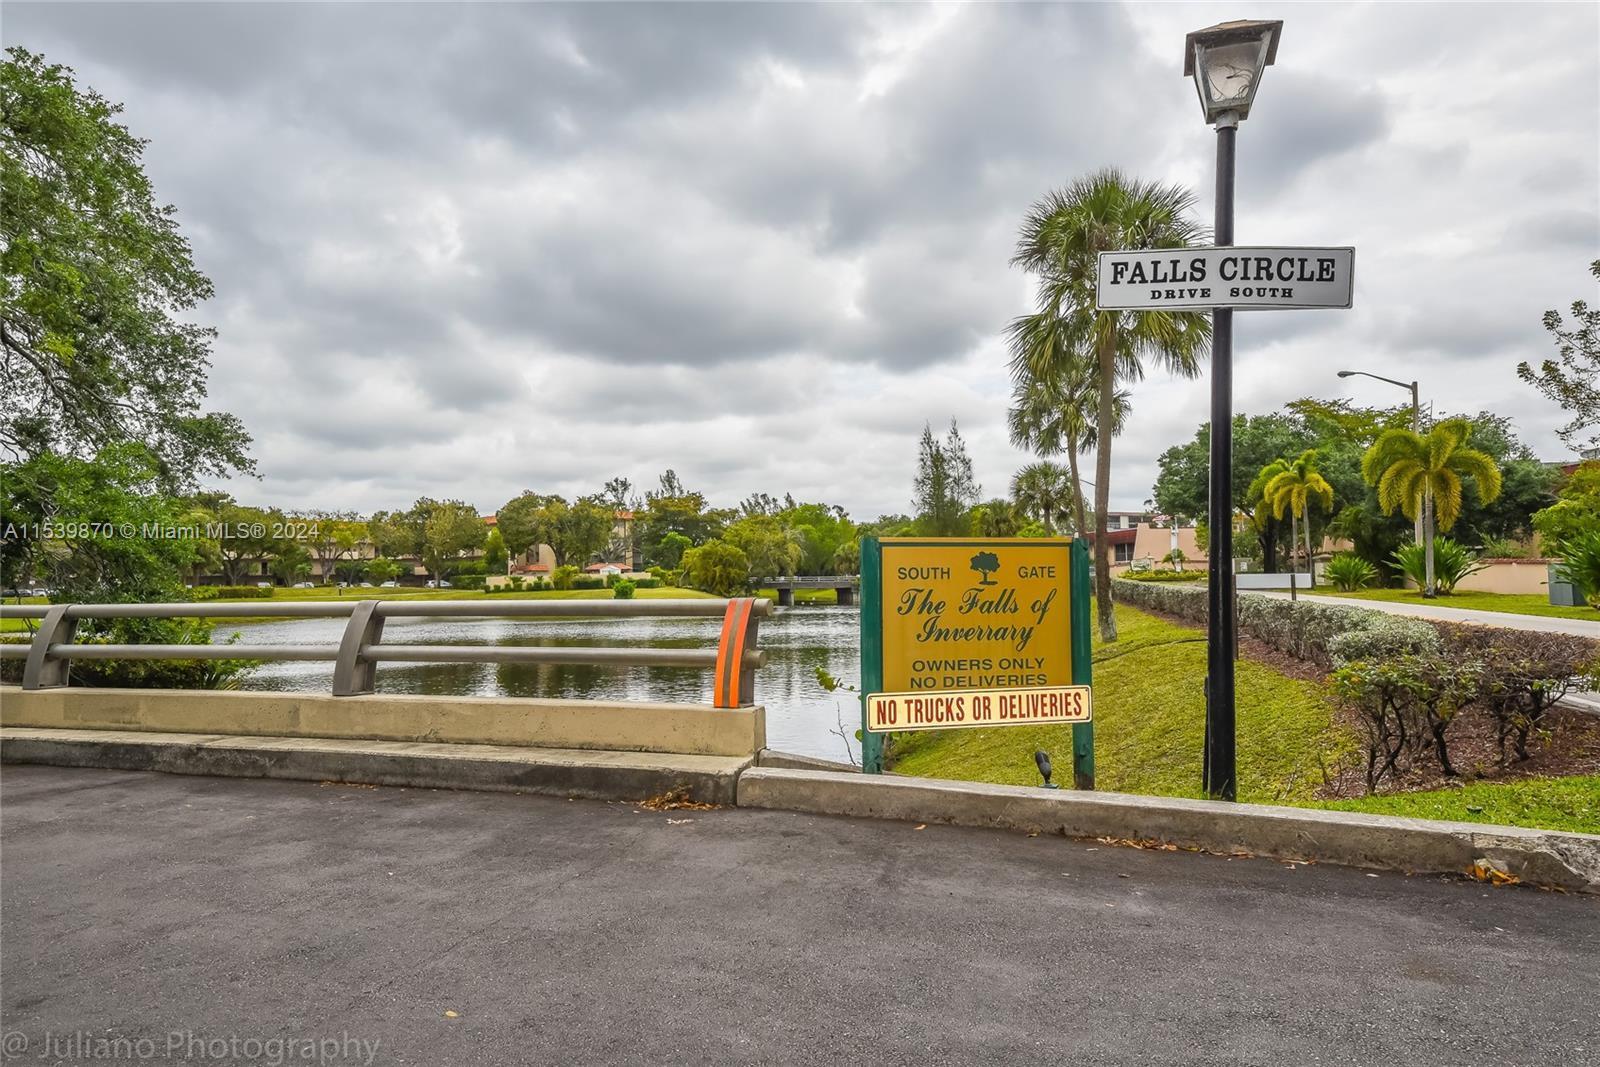 Photo of 6300 S Fall Circle Dr #111 in Lauderhill, FL